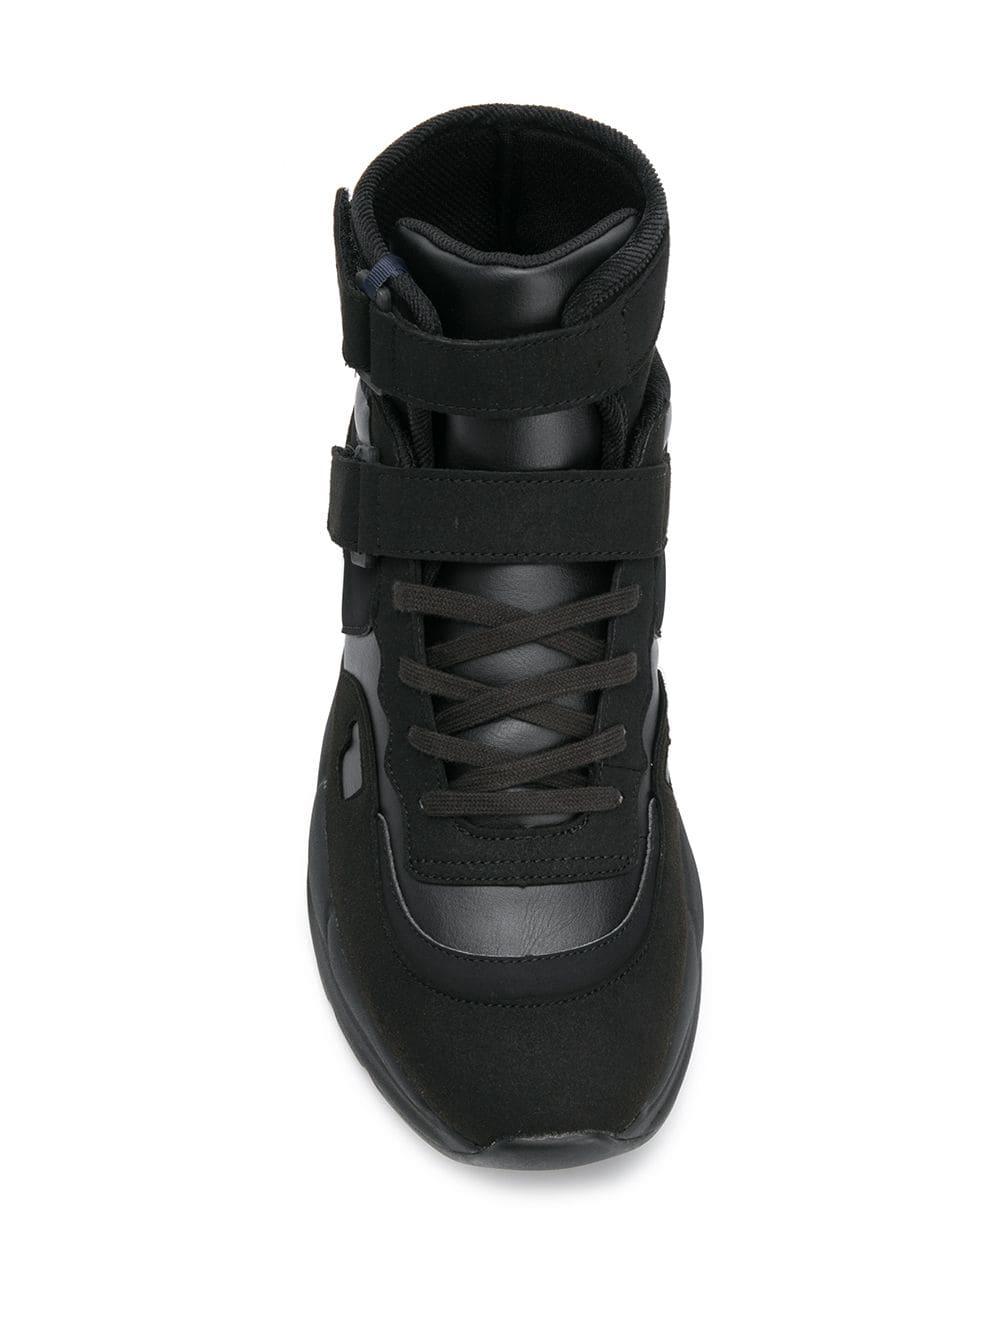 Tommy Hilfiger Leather X Lewis Hamilton Sneakers in Black for Men - Lyst